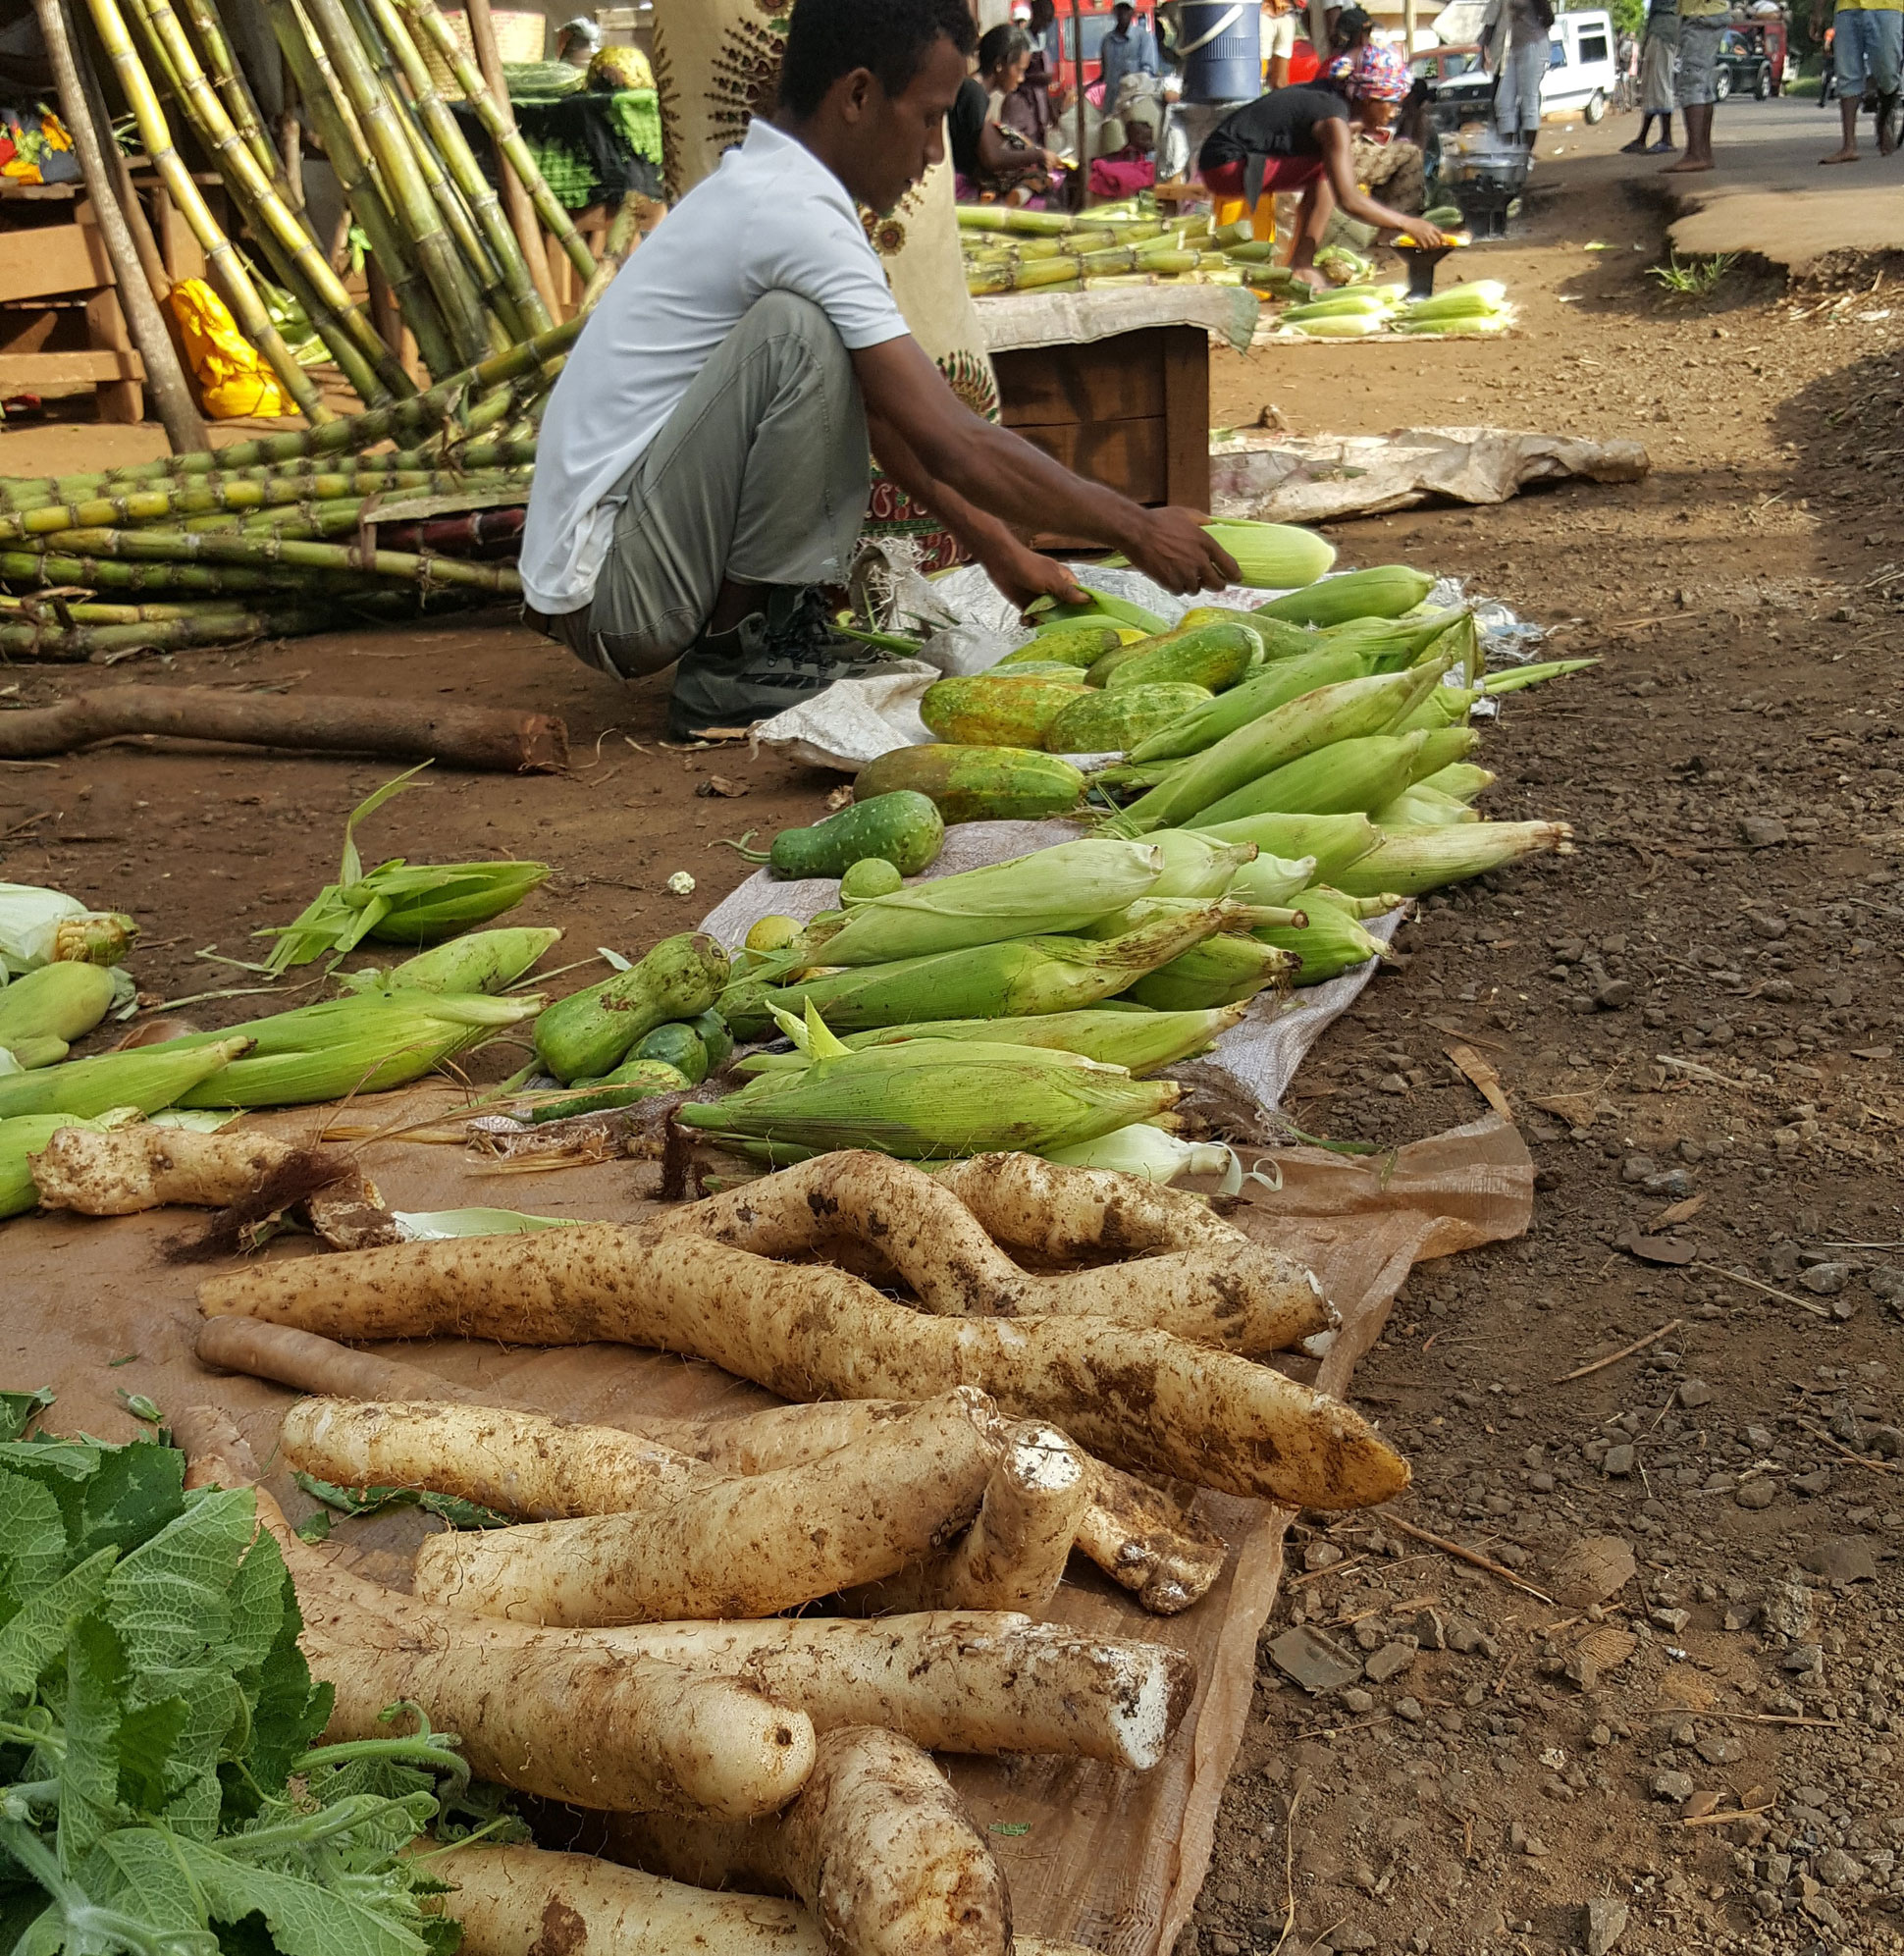 Selection of yams on road